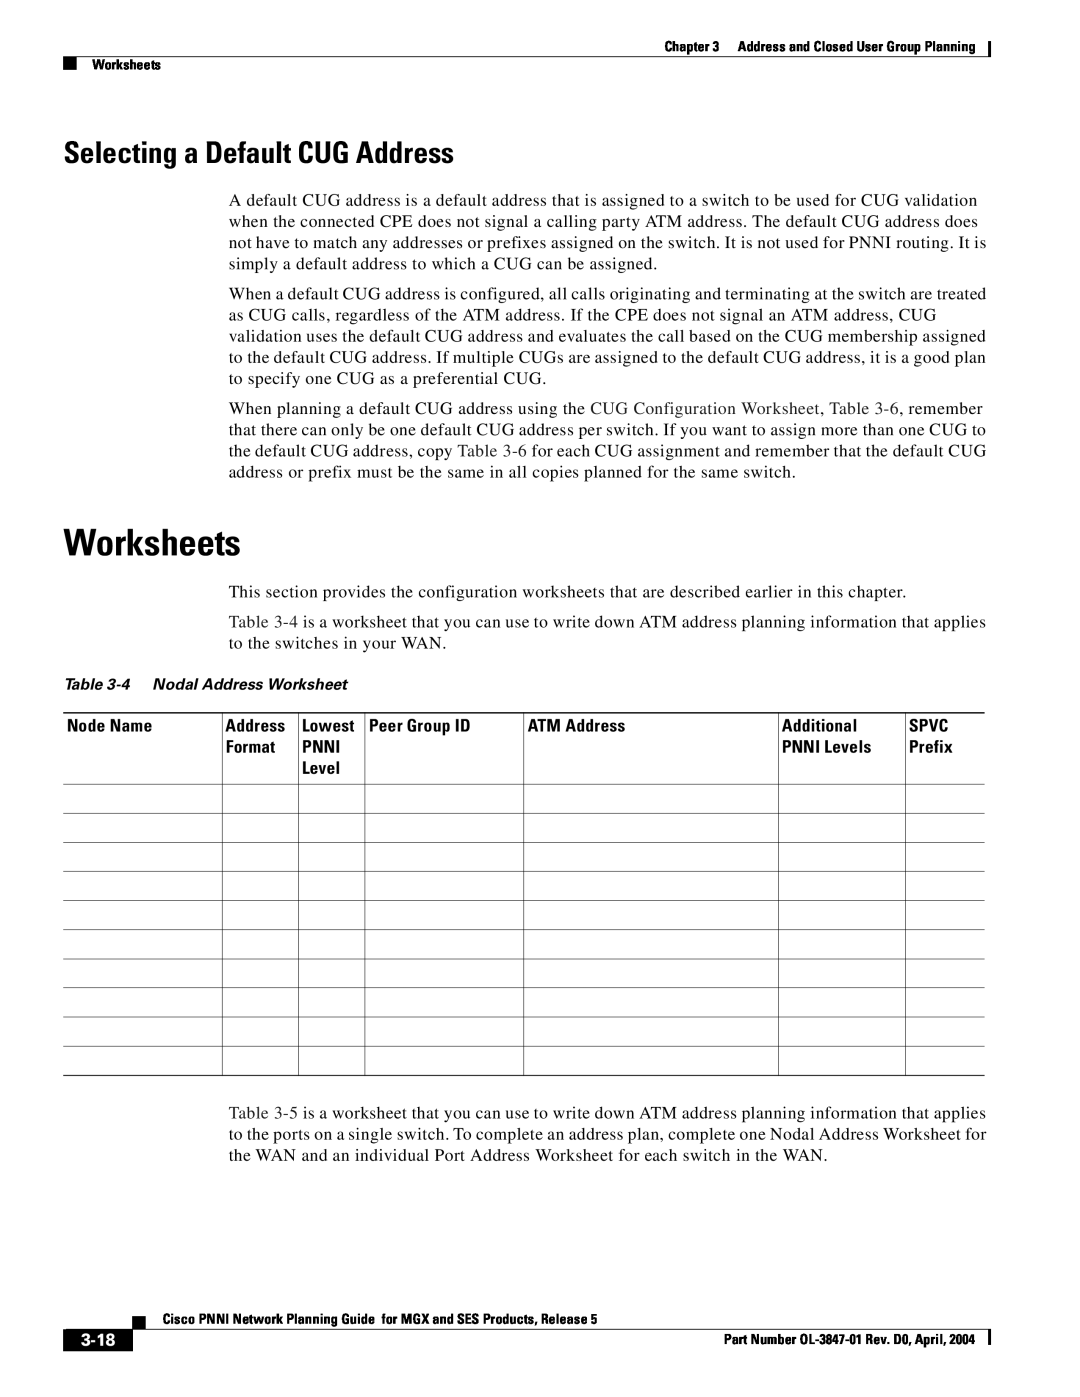 Cisco Systems Network Router manual Worksheets, Selecting a Default CUG Address, 3-18 